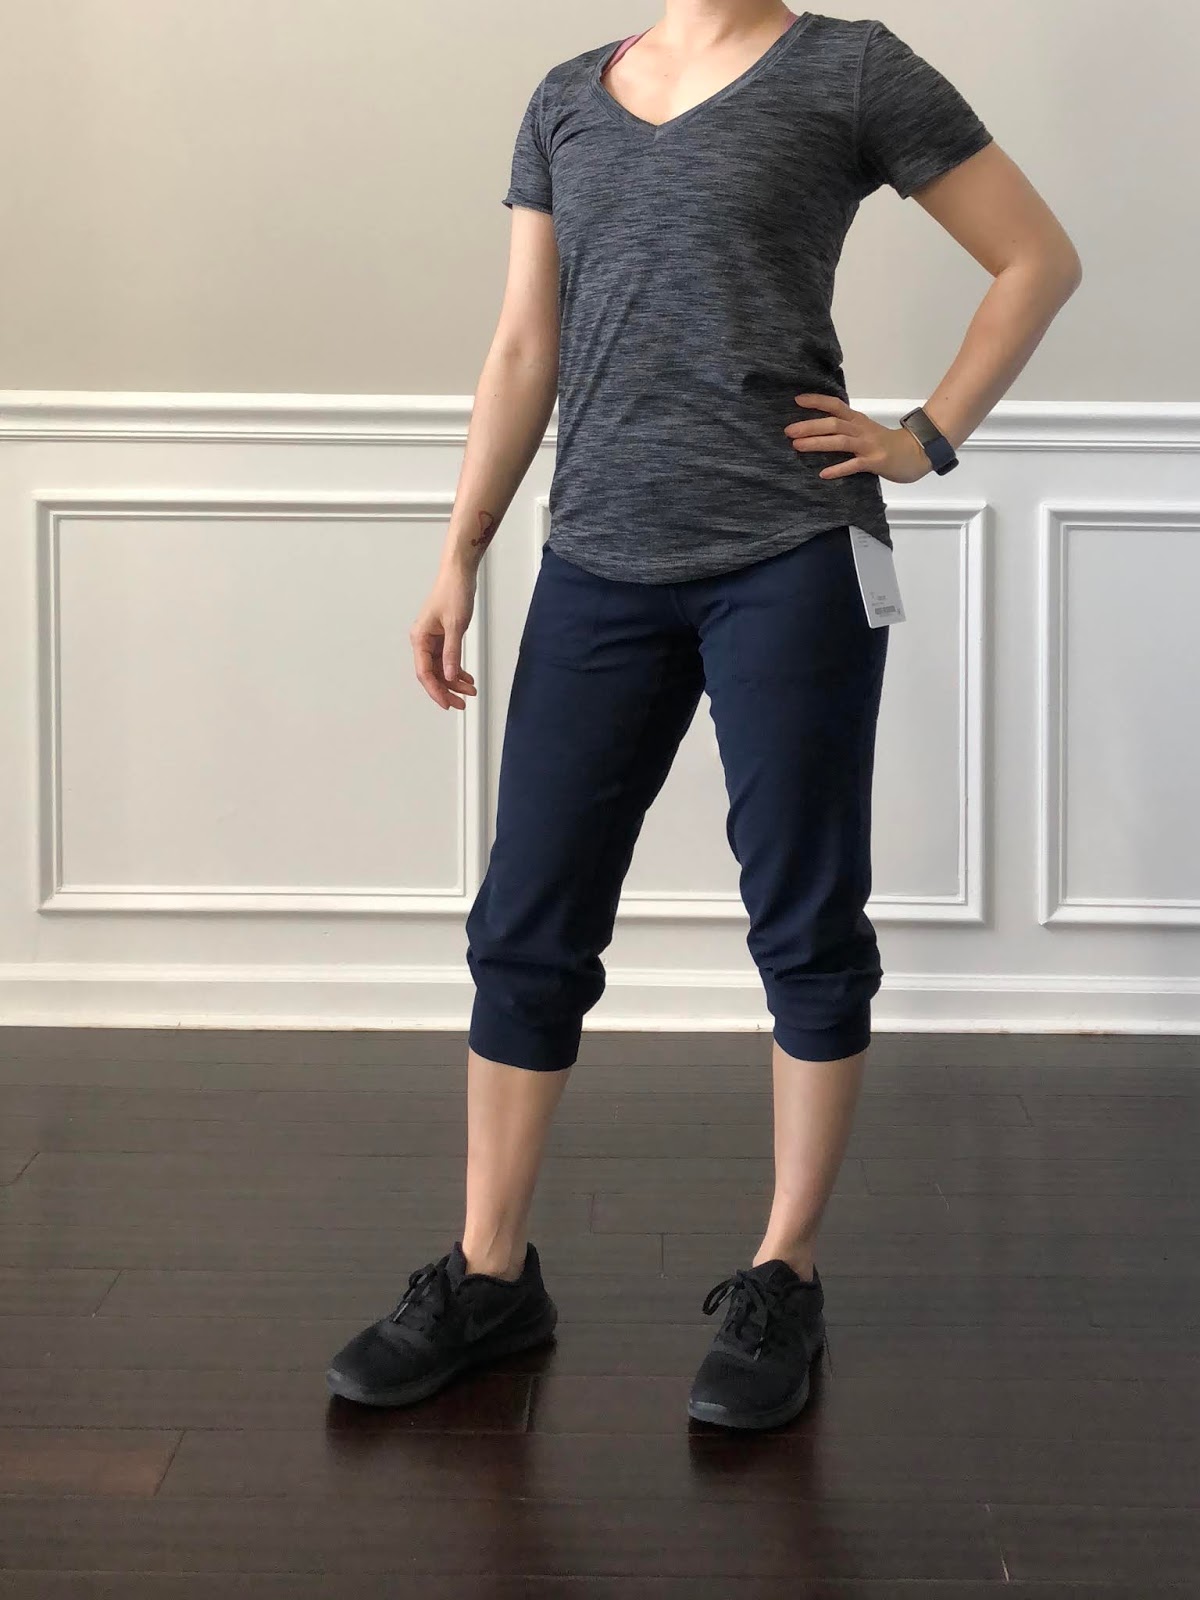 Fit Review Friday! Align Jogger Crop & Scuba Hoodie in Arctic Plum